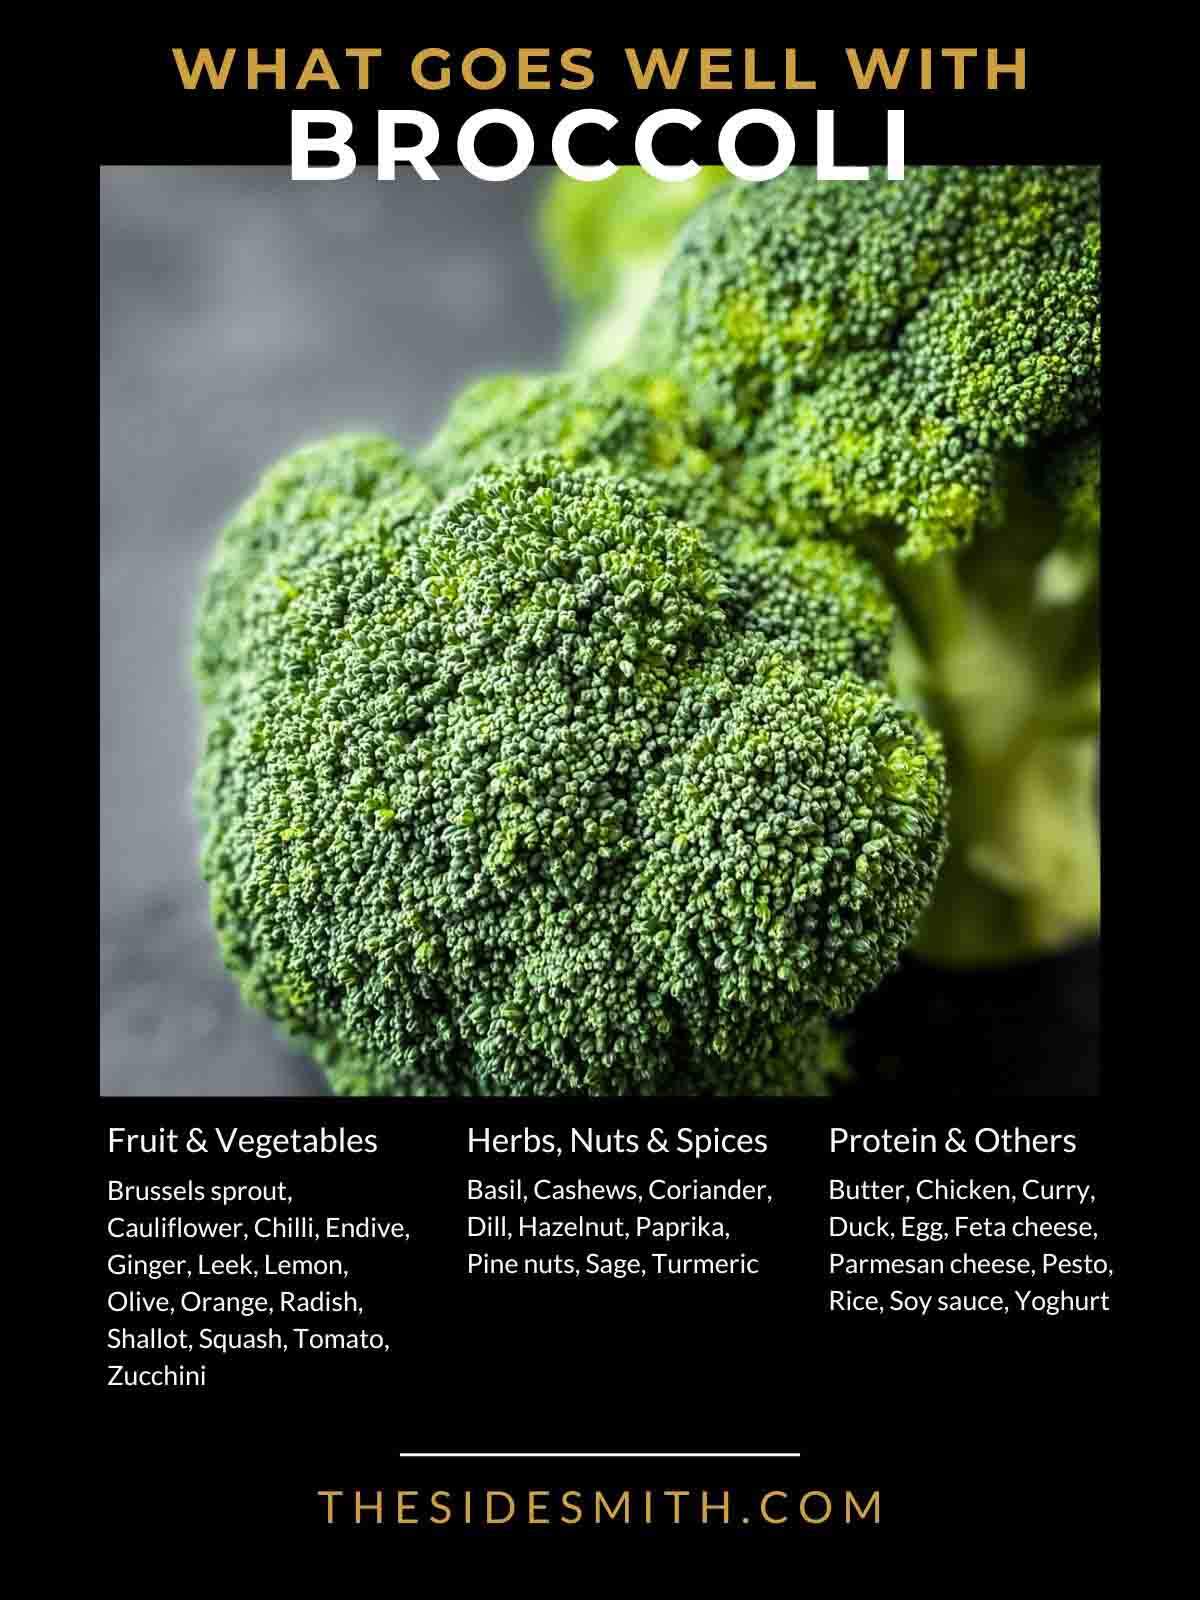 List of ingredients that go well with broccoli